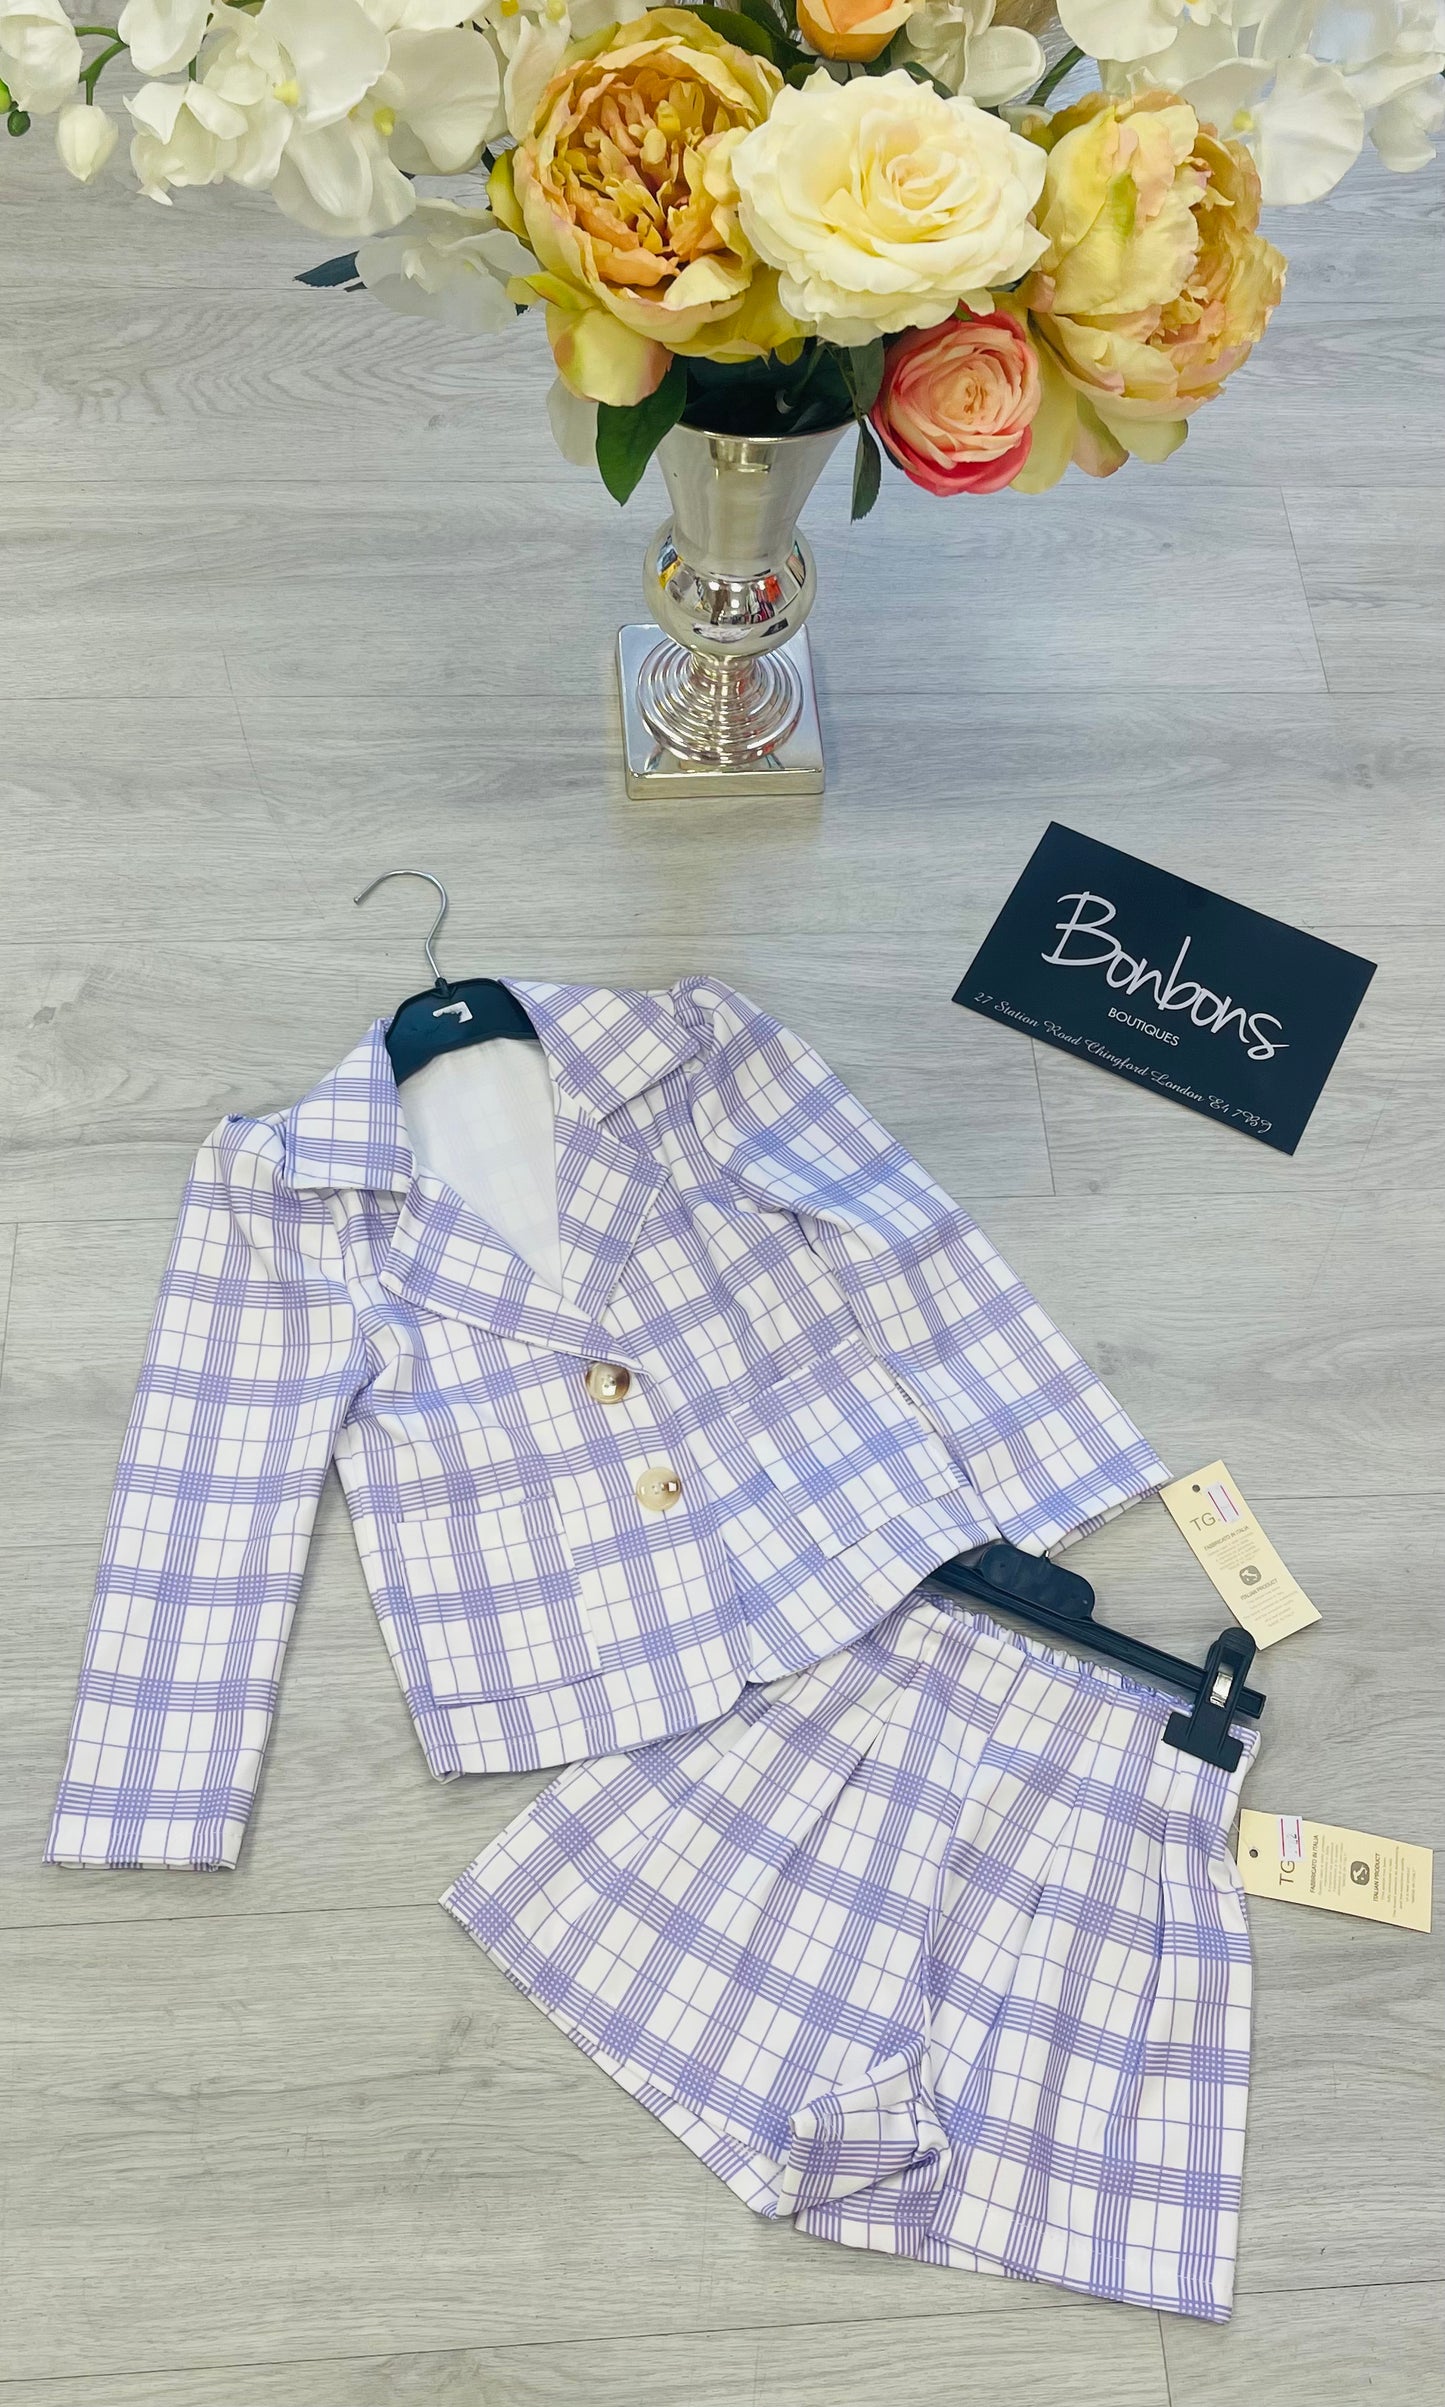 Kelly’s two-piece blouse set